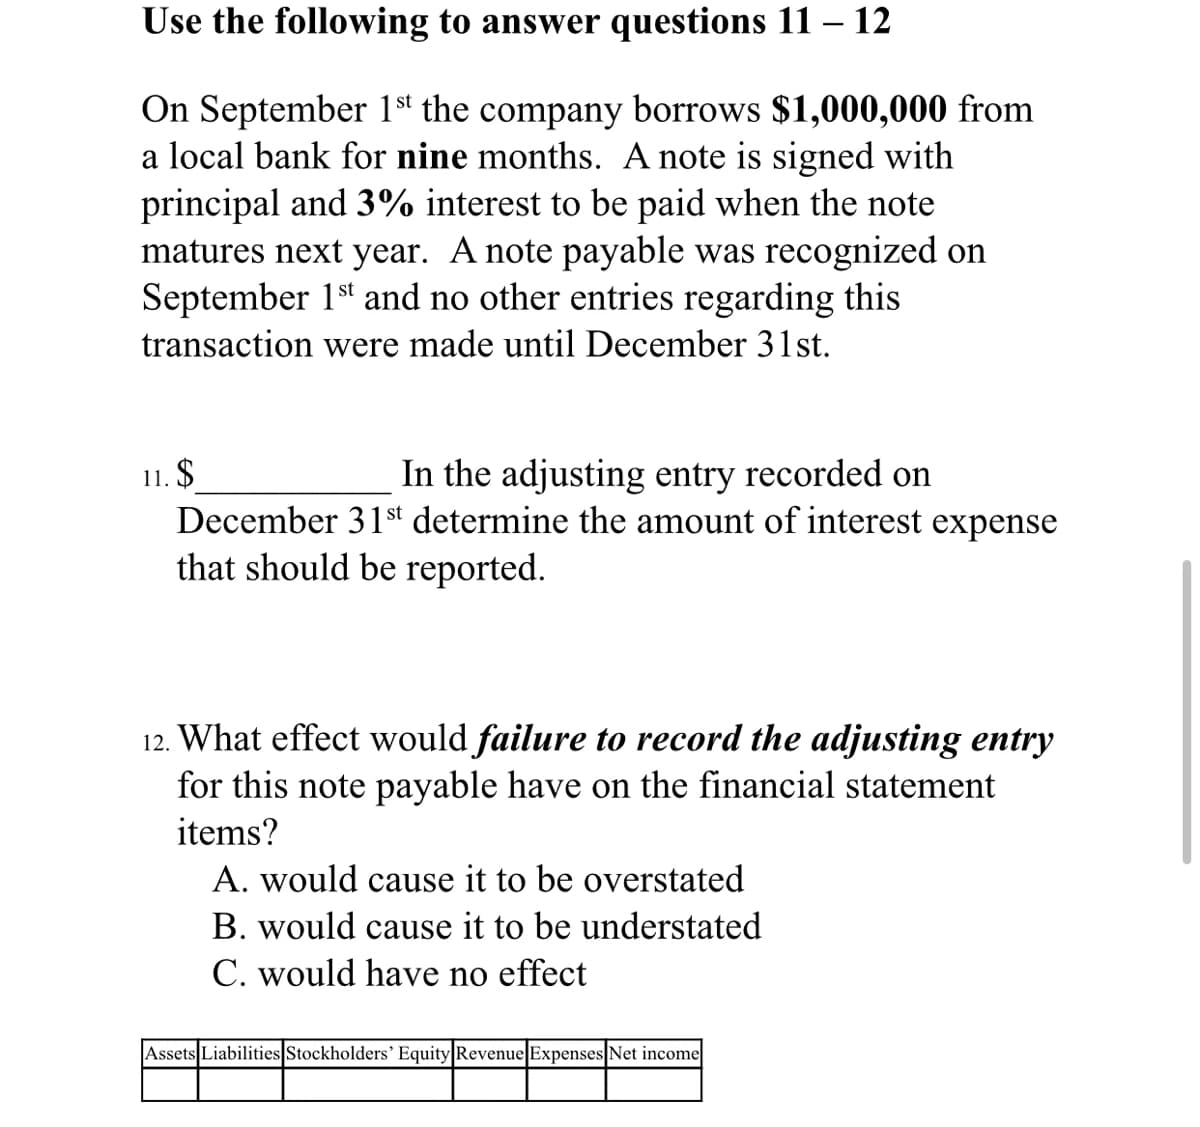 Use the following to answer questions 11 – 12
On September 1s' the company borrows $1,000,000 from
a local bank for nine months. A note is signed with
principal and 3% interest to be paid when the note
matures next year. A note payable was recognized on
September 1st and no other entries regarding this
transaction were made until December 31st.
In the adjusting entry recorded on
11. $
December 31st determine the amount of interest expense
that should be reported.
12. What effect would failure to record the adjusting entry
for this note payable have on the financial statement
items?
A. would cause it to be overstated
B. would cause it to be understated
C. would have no effect
Assets Liabilities Stockholders' Equity|Revenue Expenses Net income
